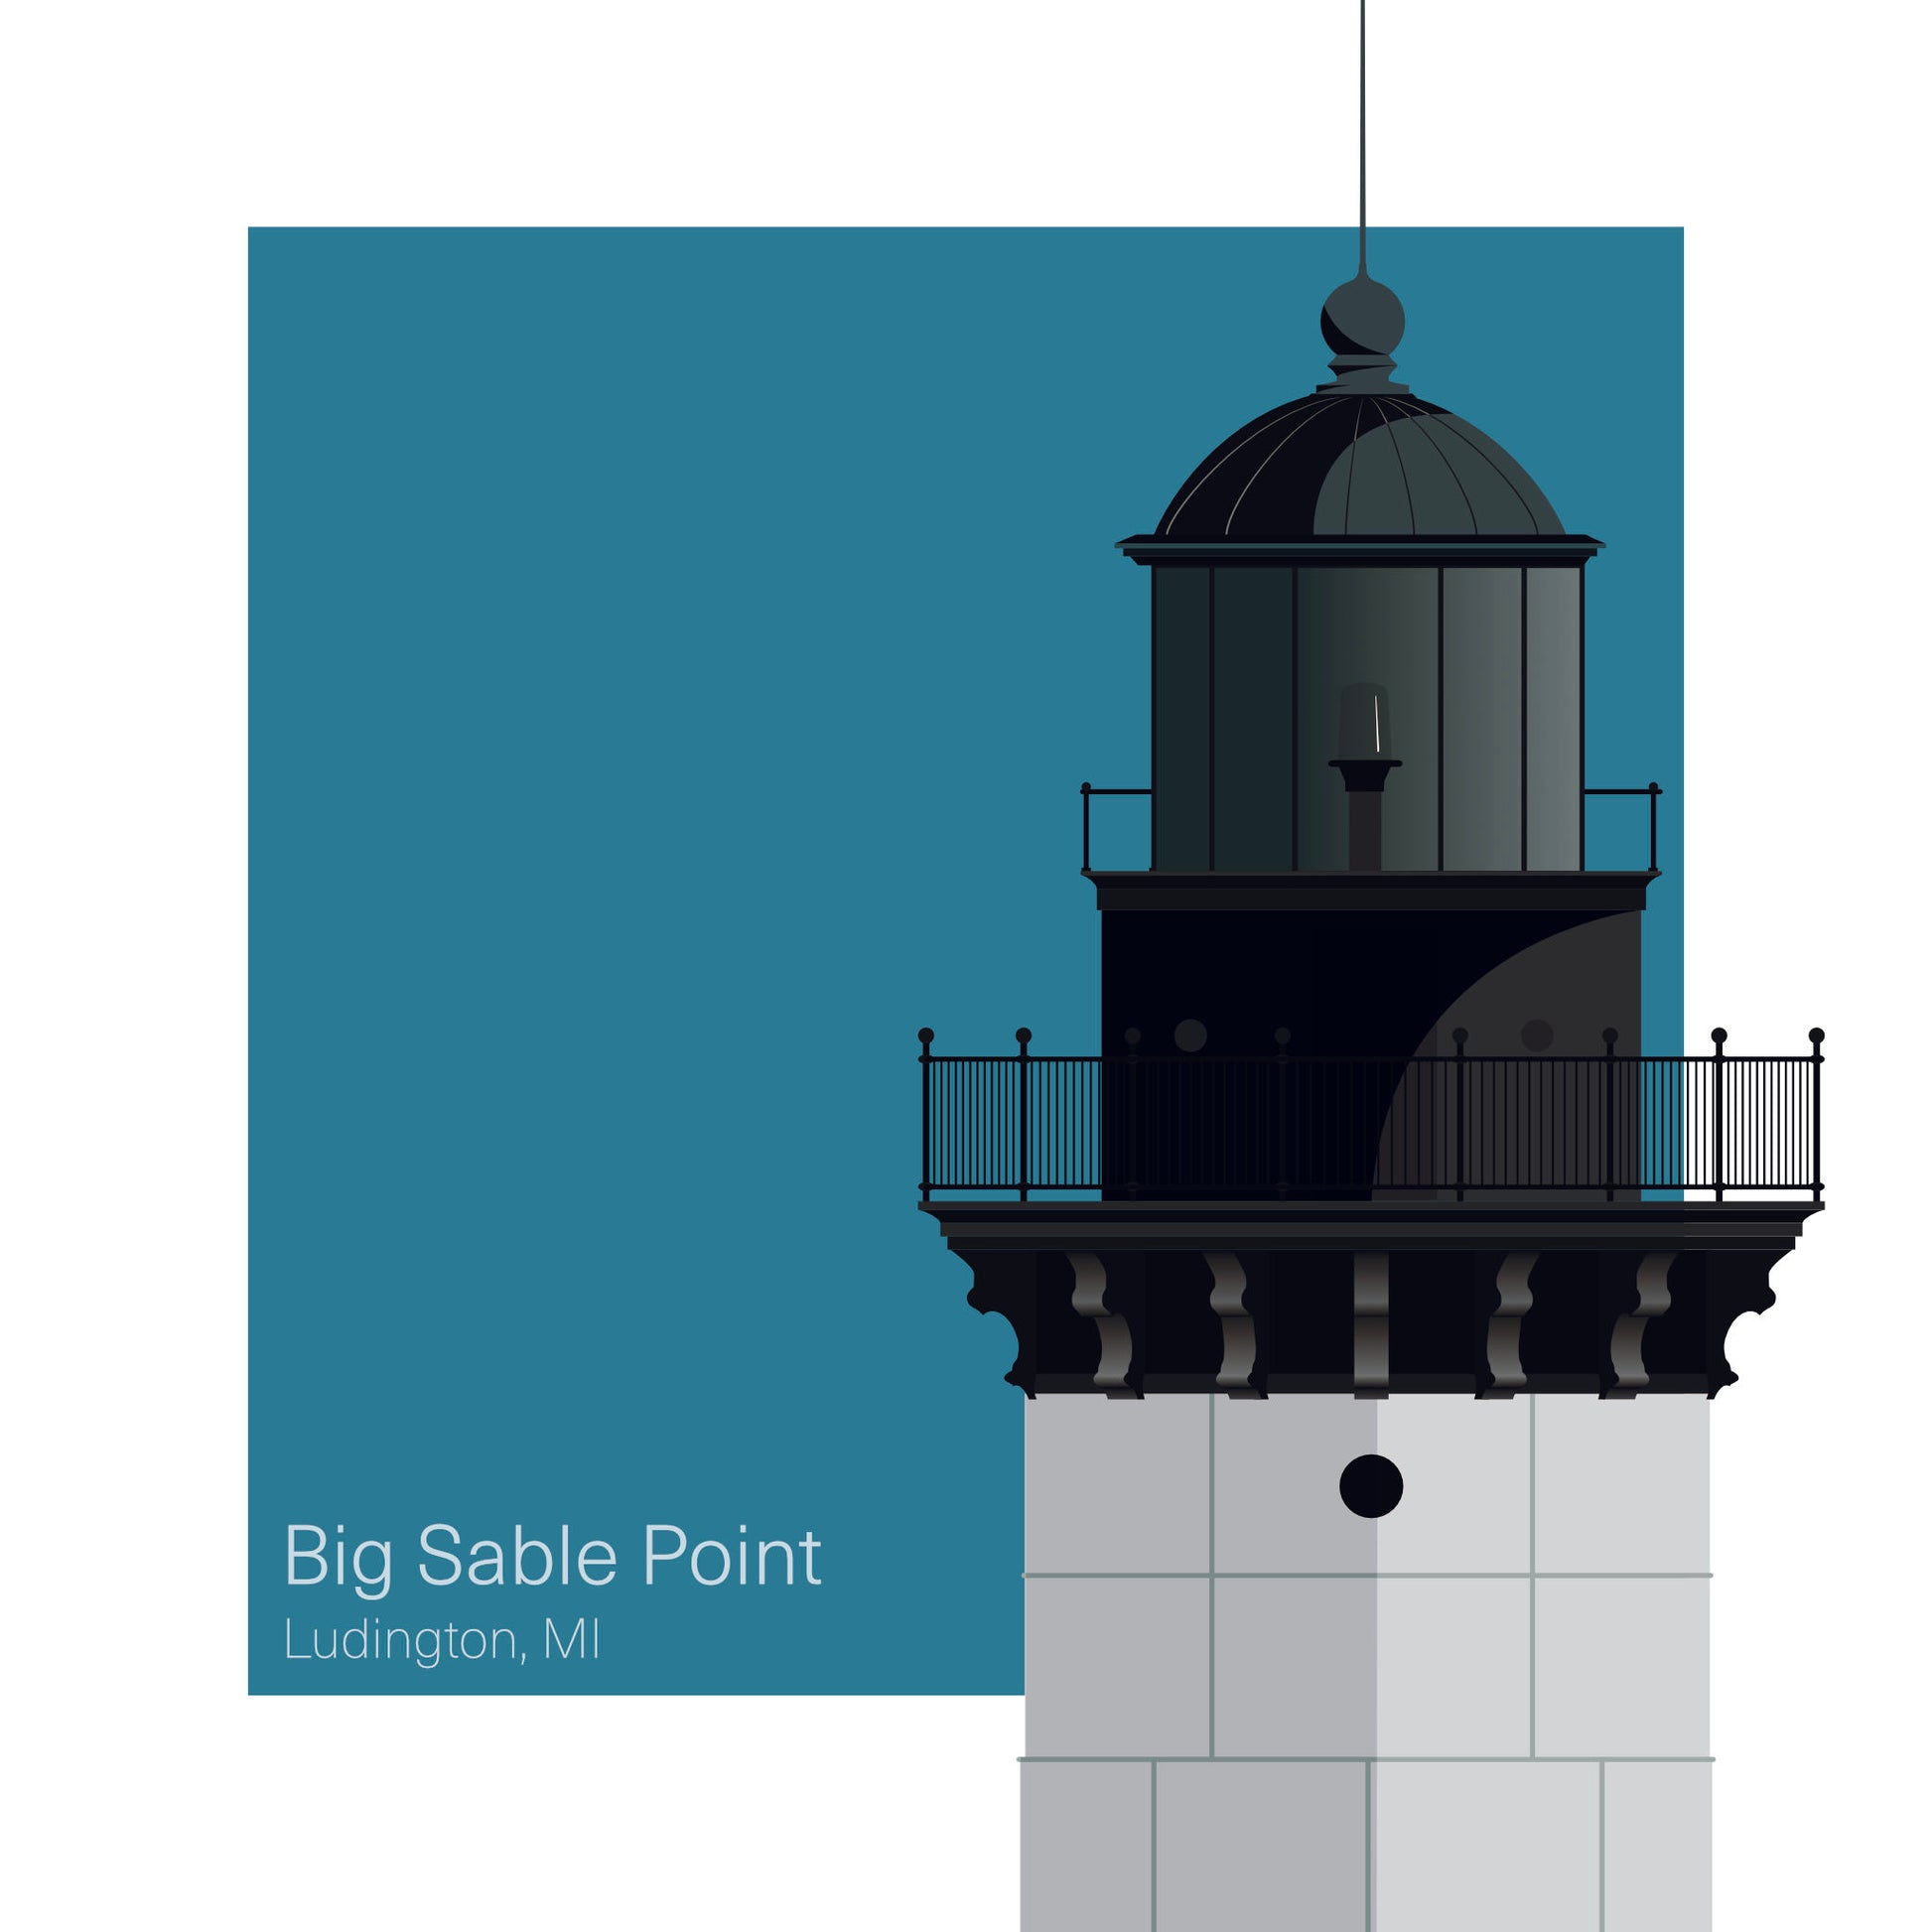 Illustration of the Big Sable Point lighthouse, MI, USA. On a white background with aqua blue square as a backdrop.